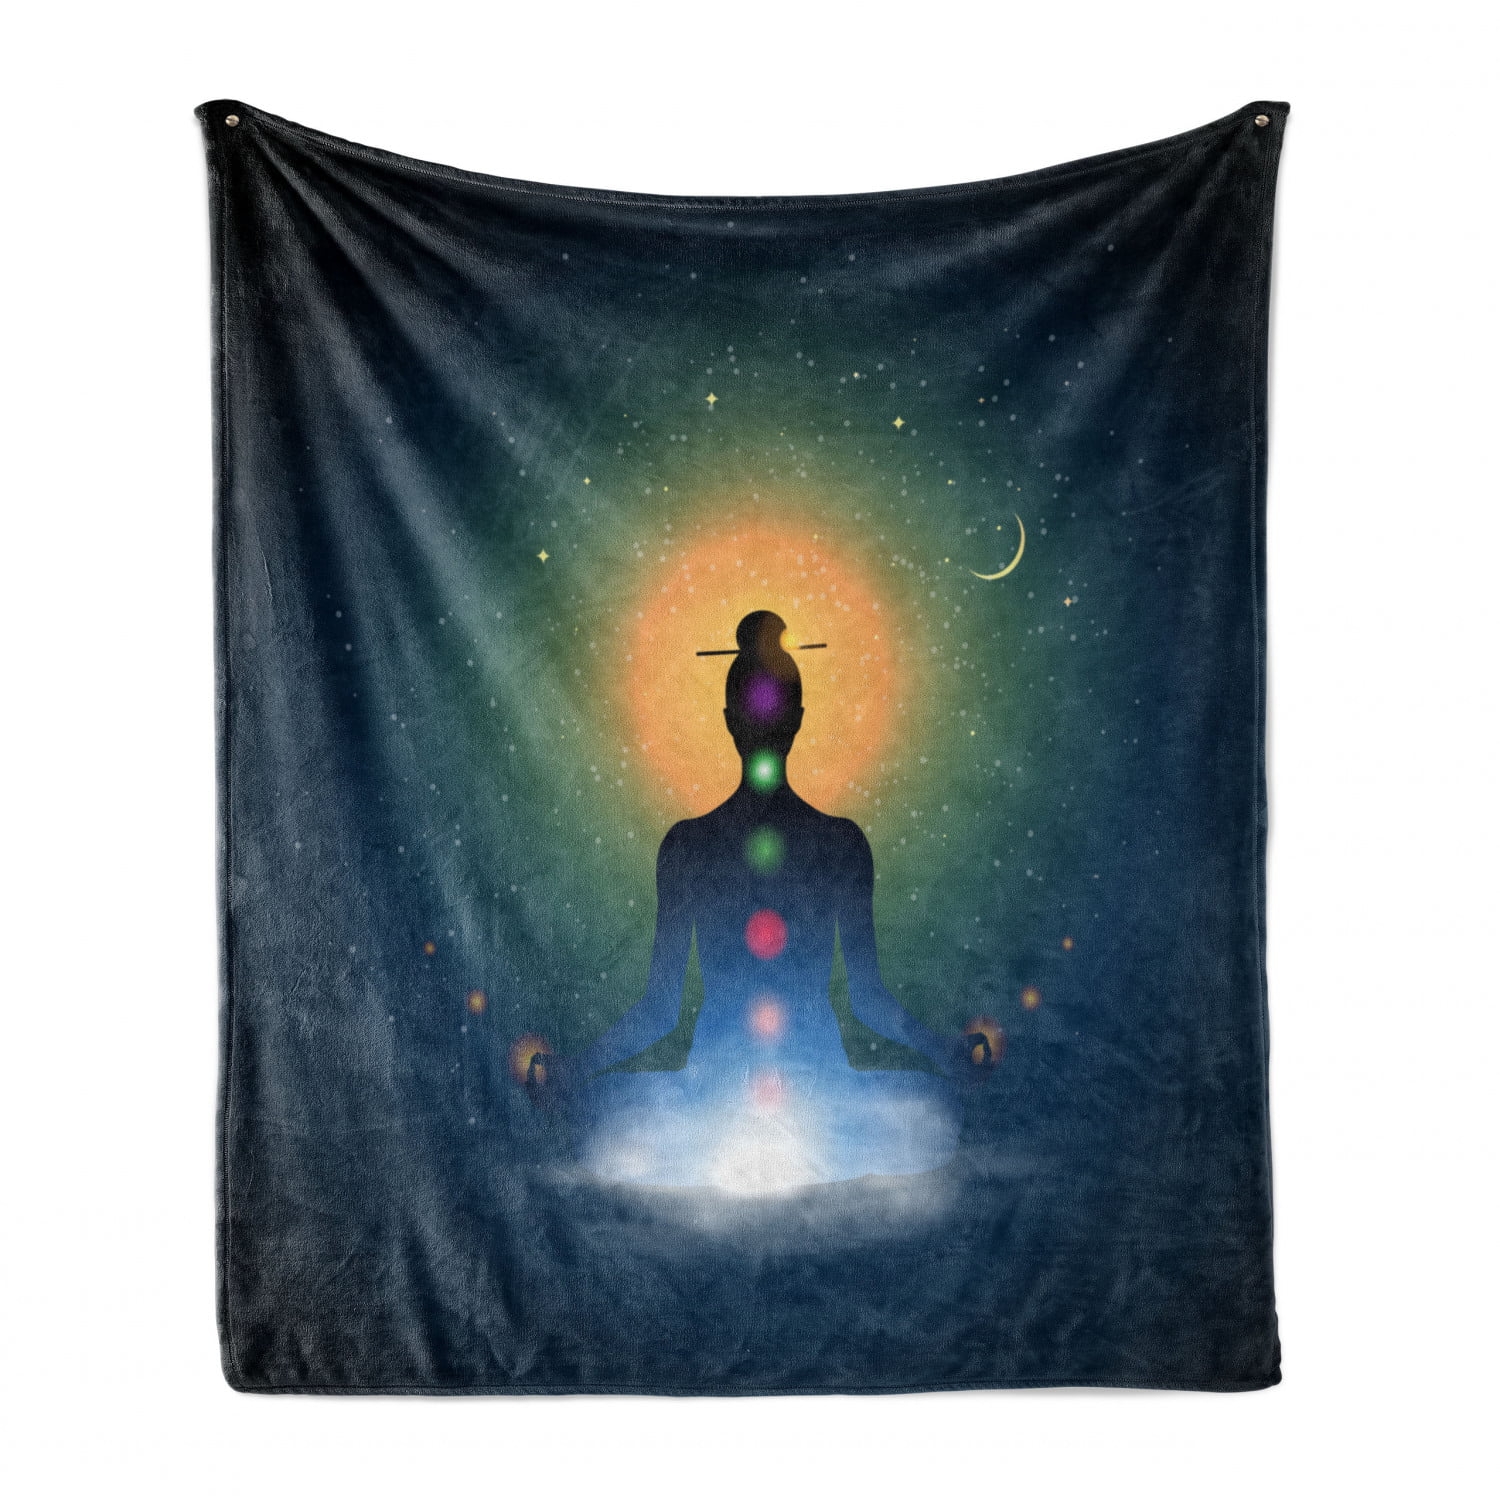 Meditating Silhouette Sitting in Lotus Position Colorful s Trance Mood Happiness Cozy Plush for Indoor and Outdoor Use Multicolor 50 x 60 Ambesonne Yoga Soft Flannel Fleece Throw Blanket